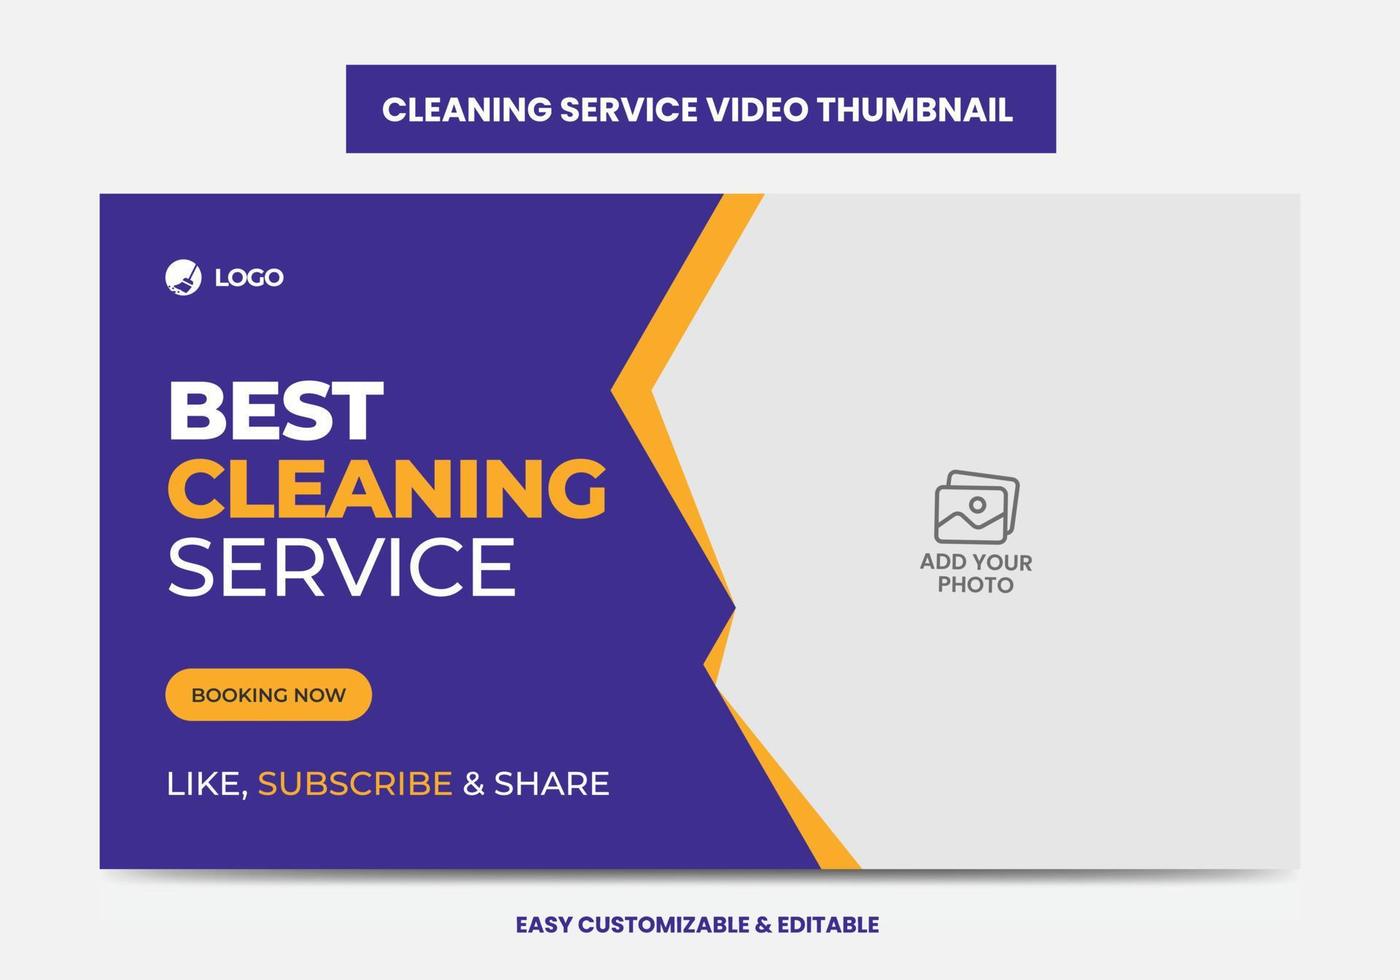 Cleaning service company video thumbnail and web banner design template. Home, office, hotel, restaurant, garden cleaning video thumbnail desgin vector